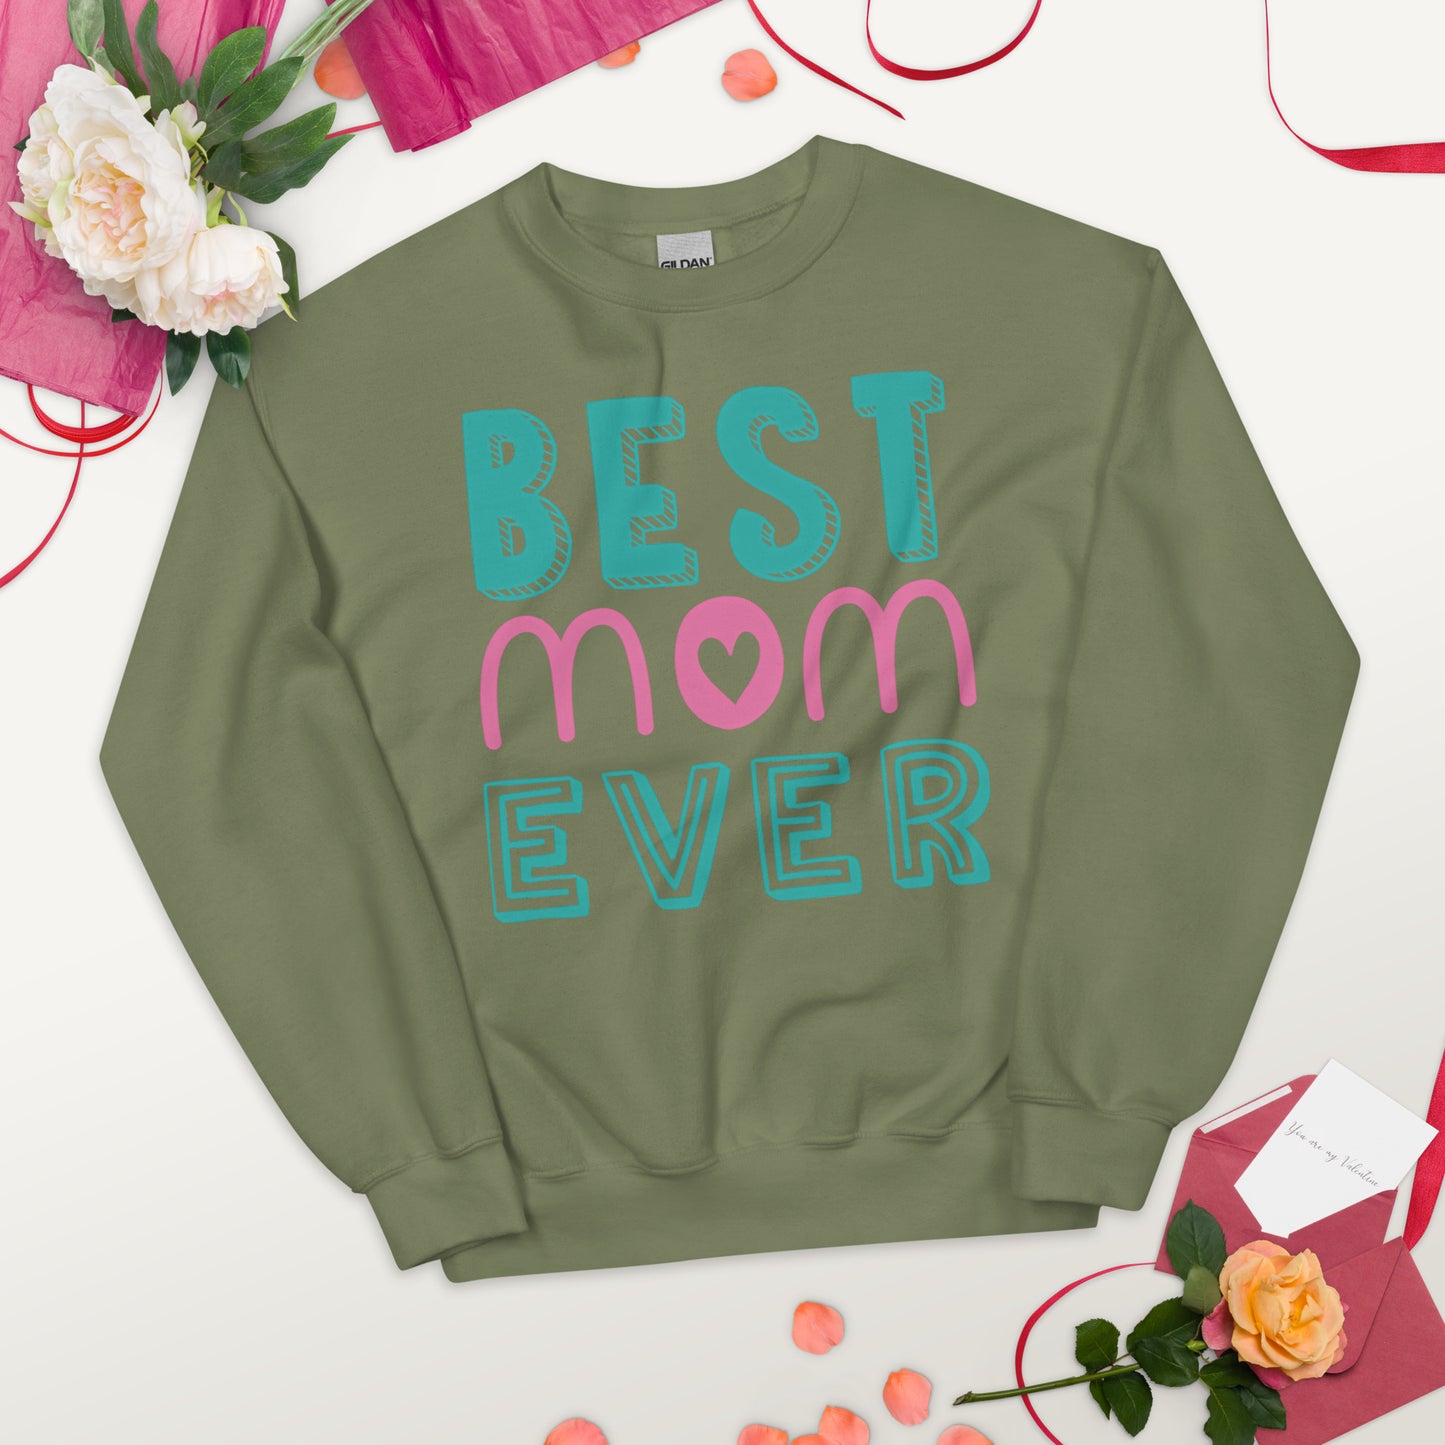 military green sweatshirt with text best MOM ever 